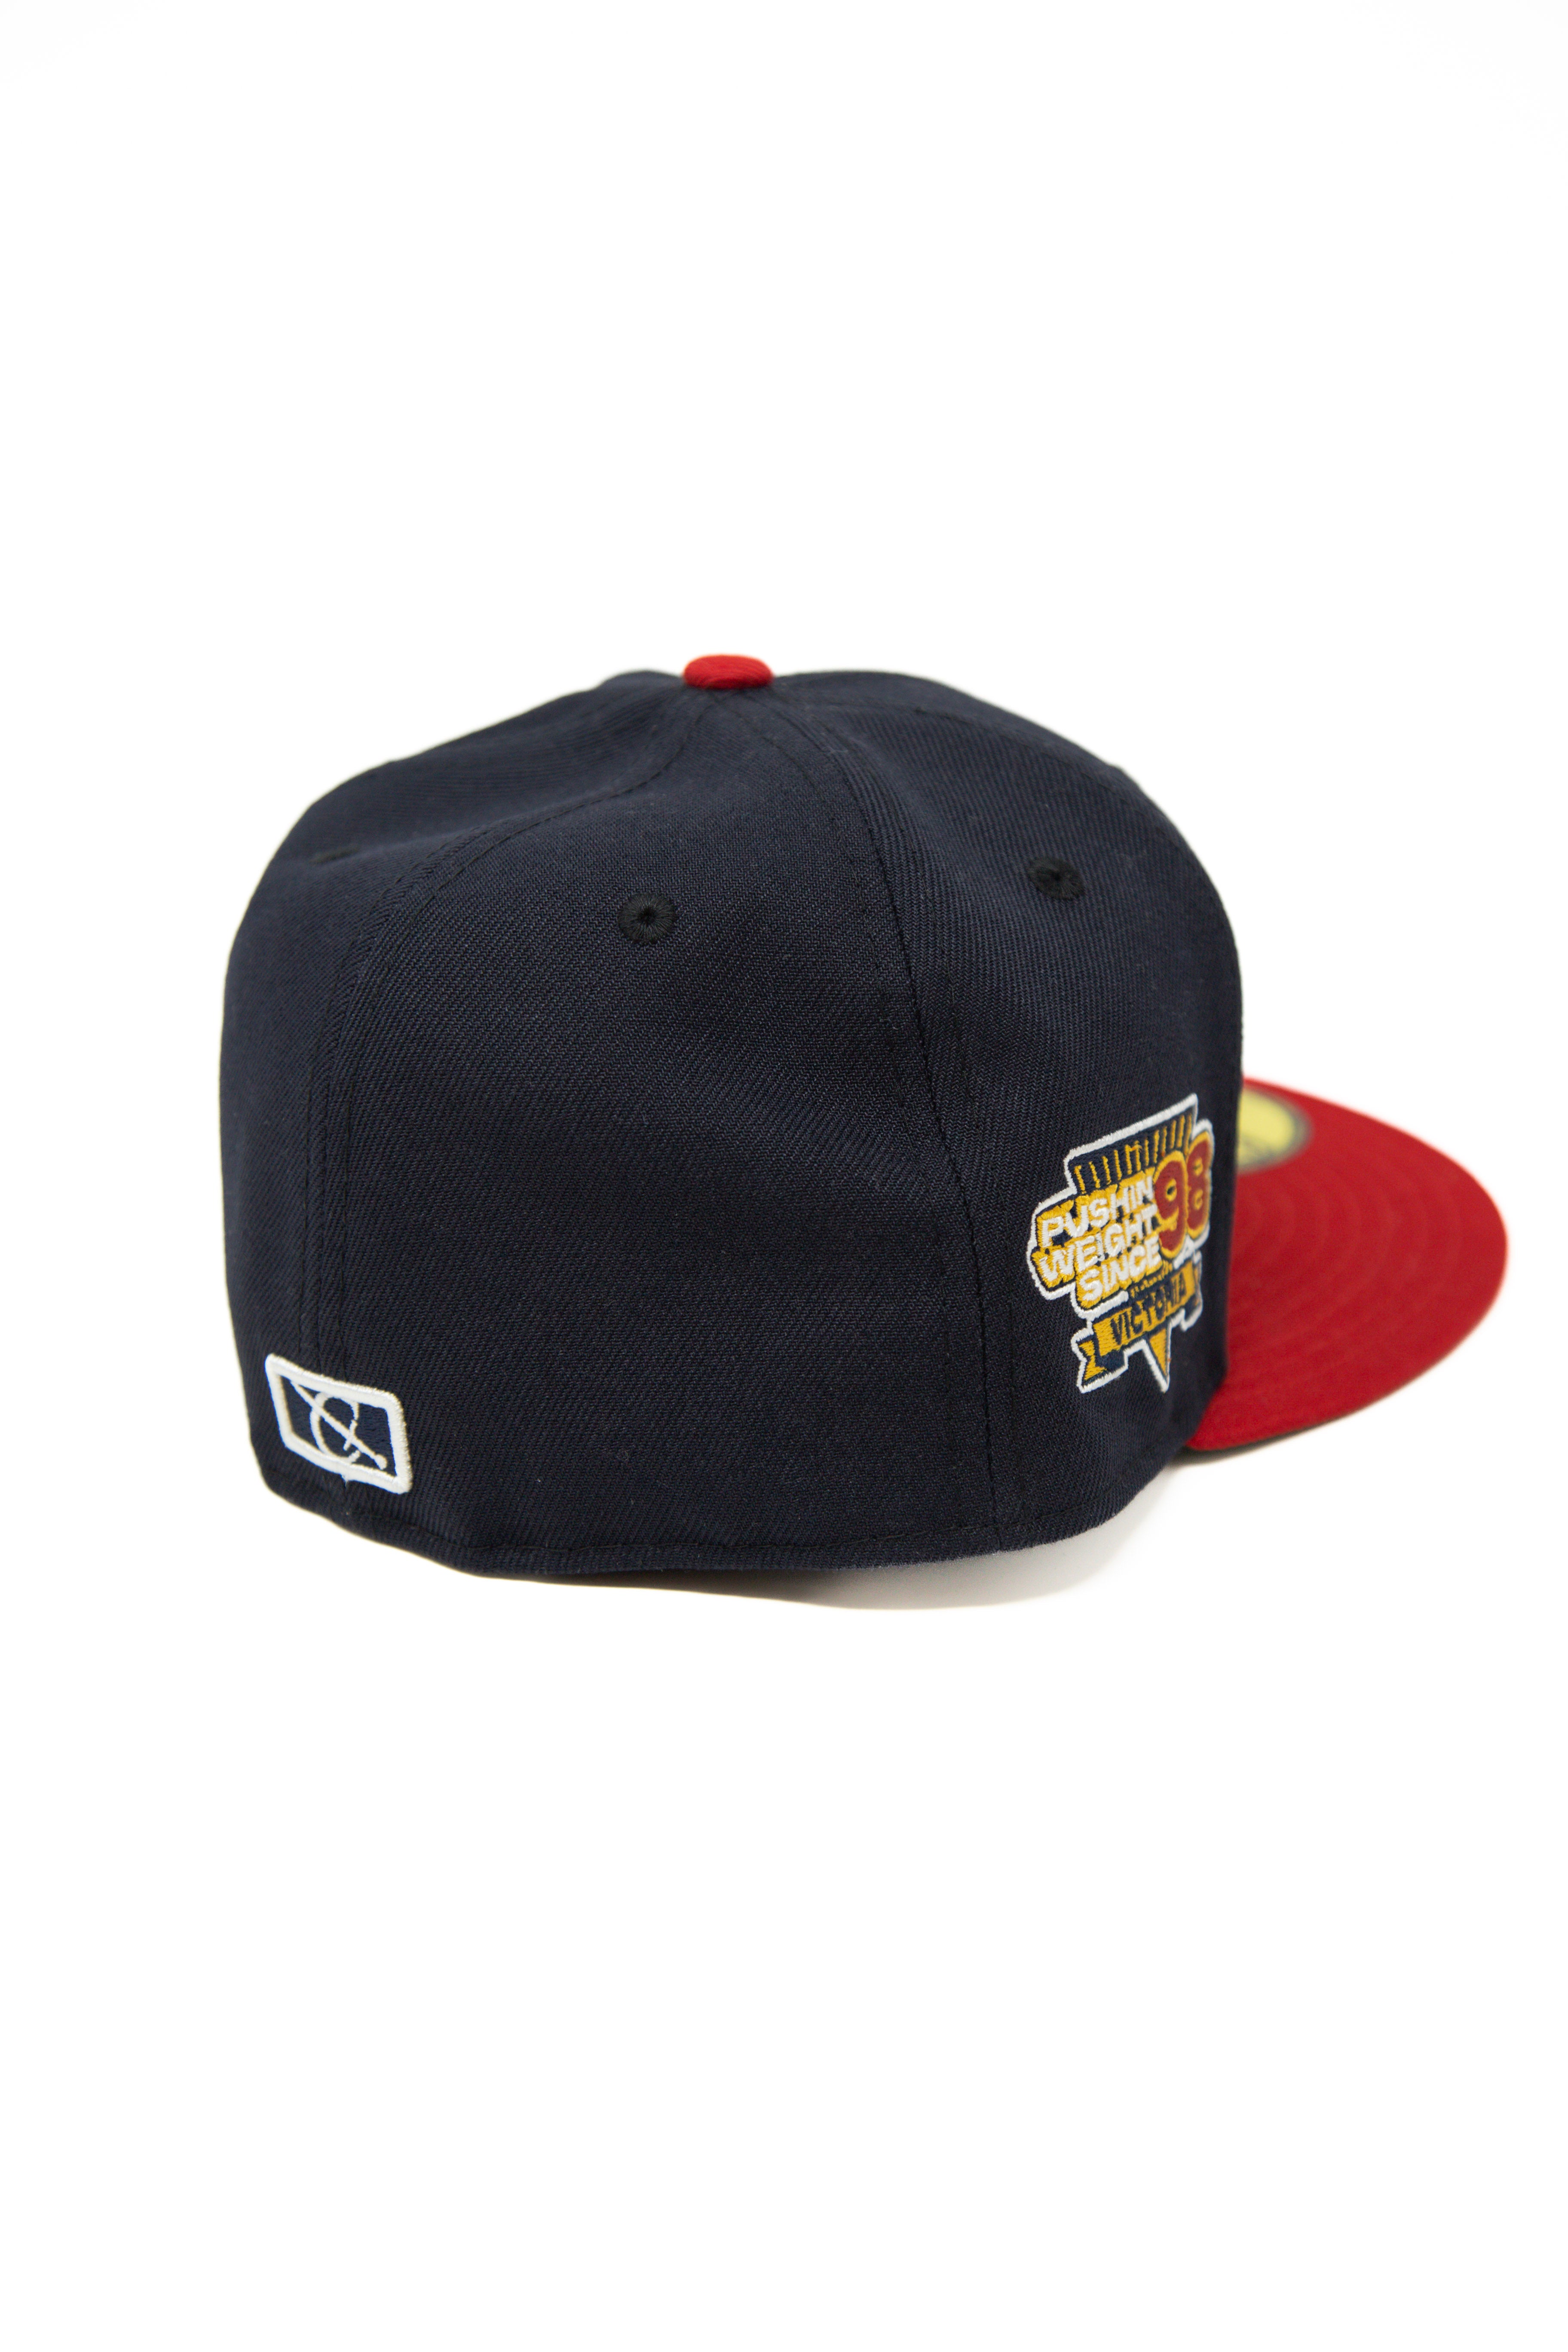 Pitchin' Work New Era Fitted Cap Navy/Red